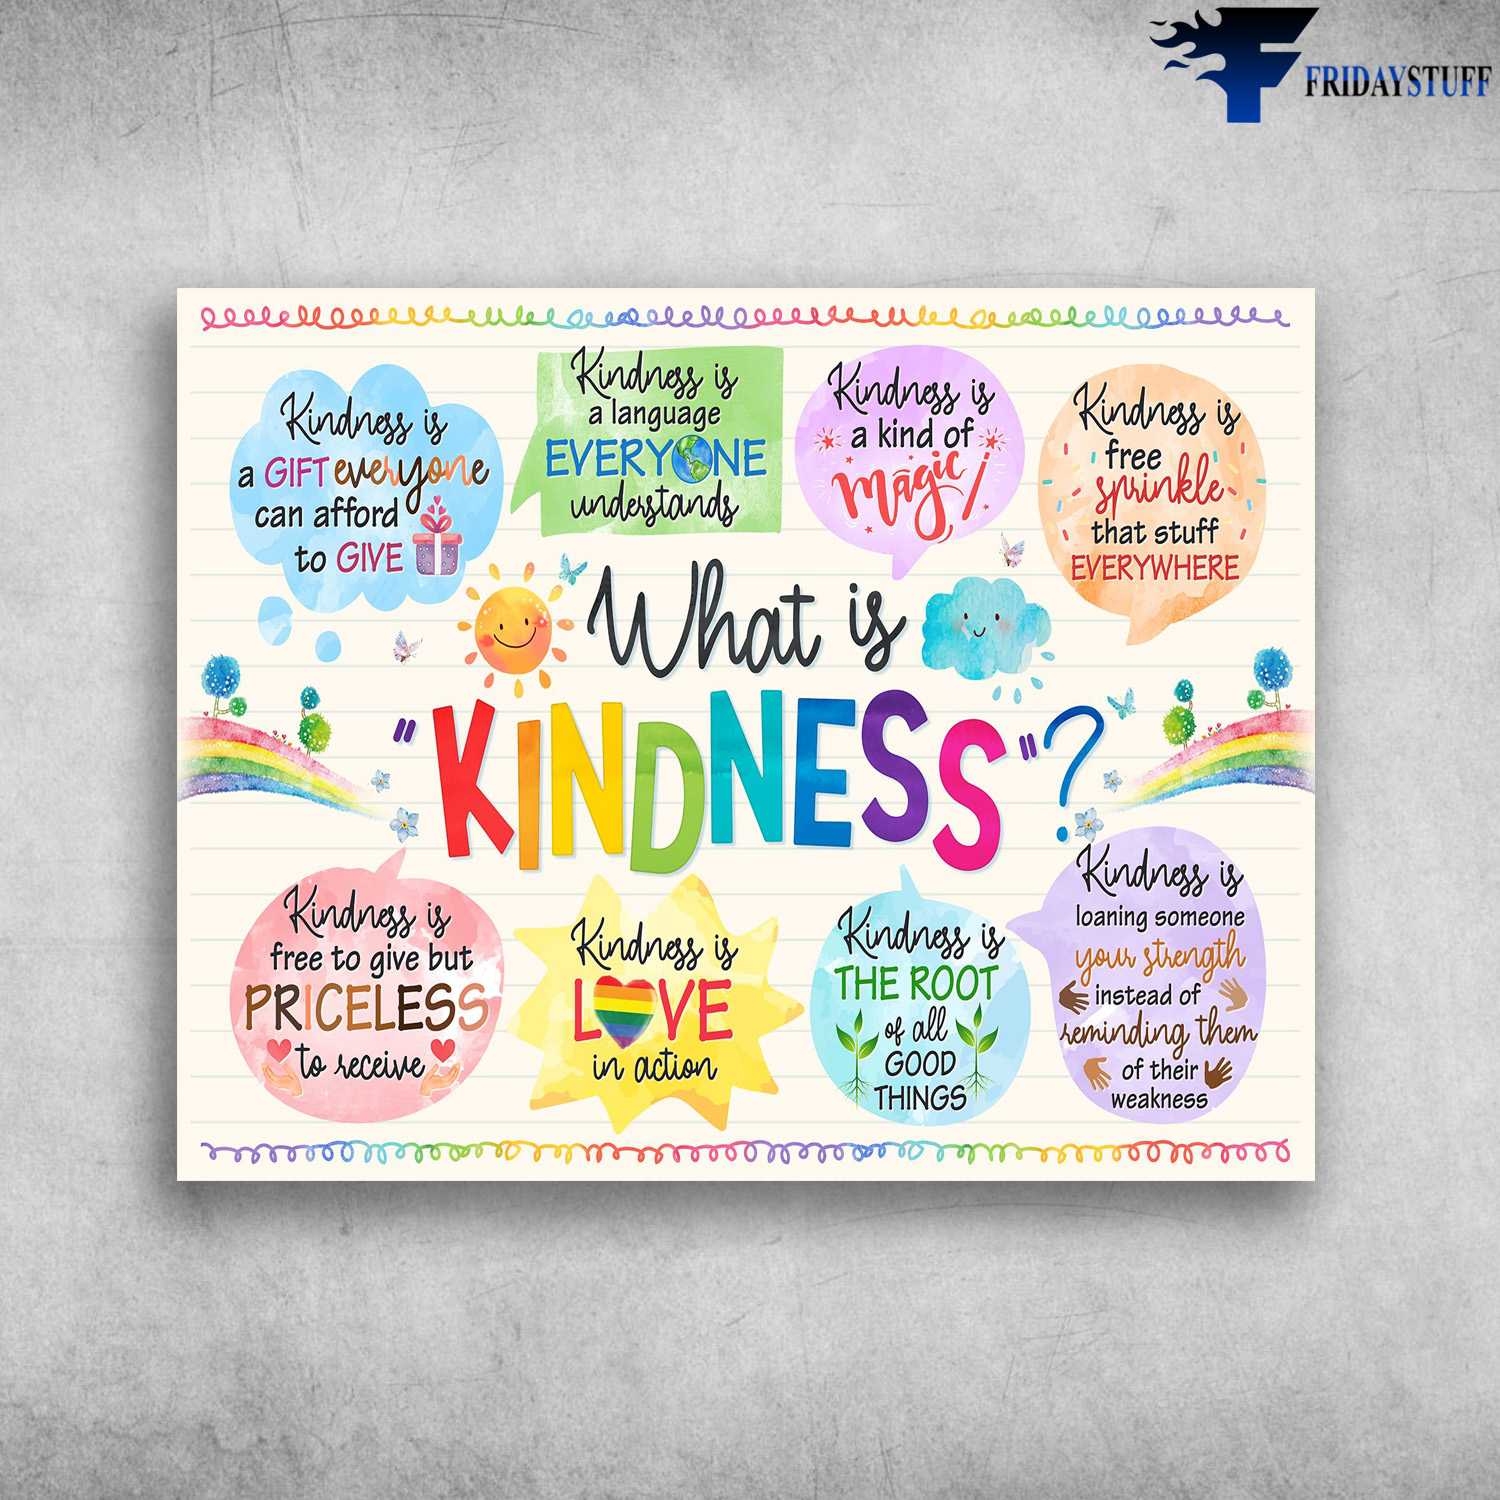 What Is Kindness, Kindness Is A Gift Everyone Can Afford To Give, Kindness Is A Language Everyone Understands, Kindness Is A Kind Of Magic, Kindness Is A Free Sprinkle That Stuff Everywhere